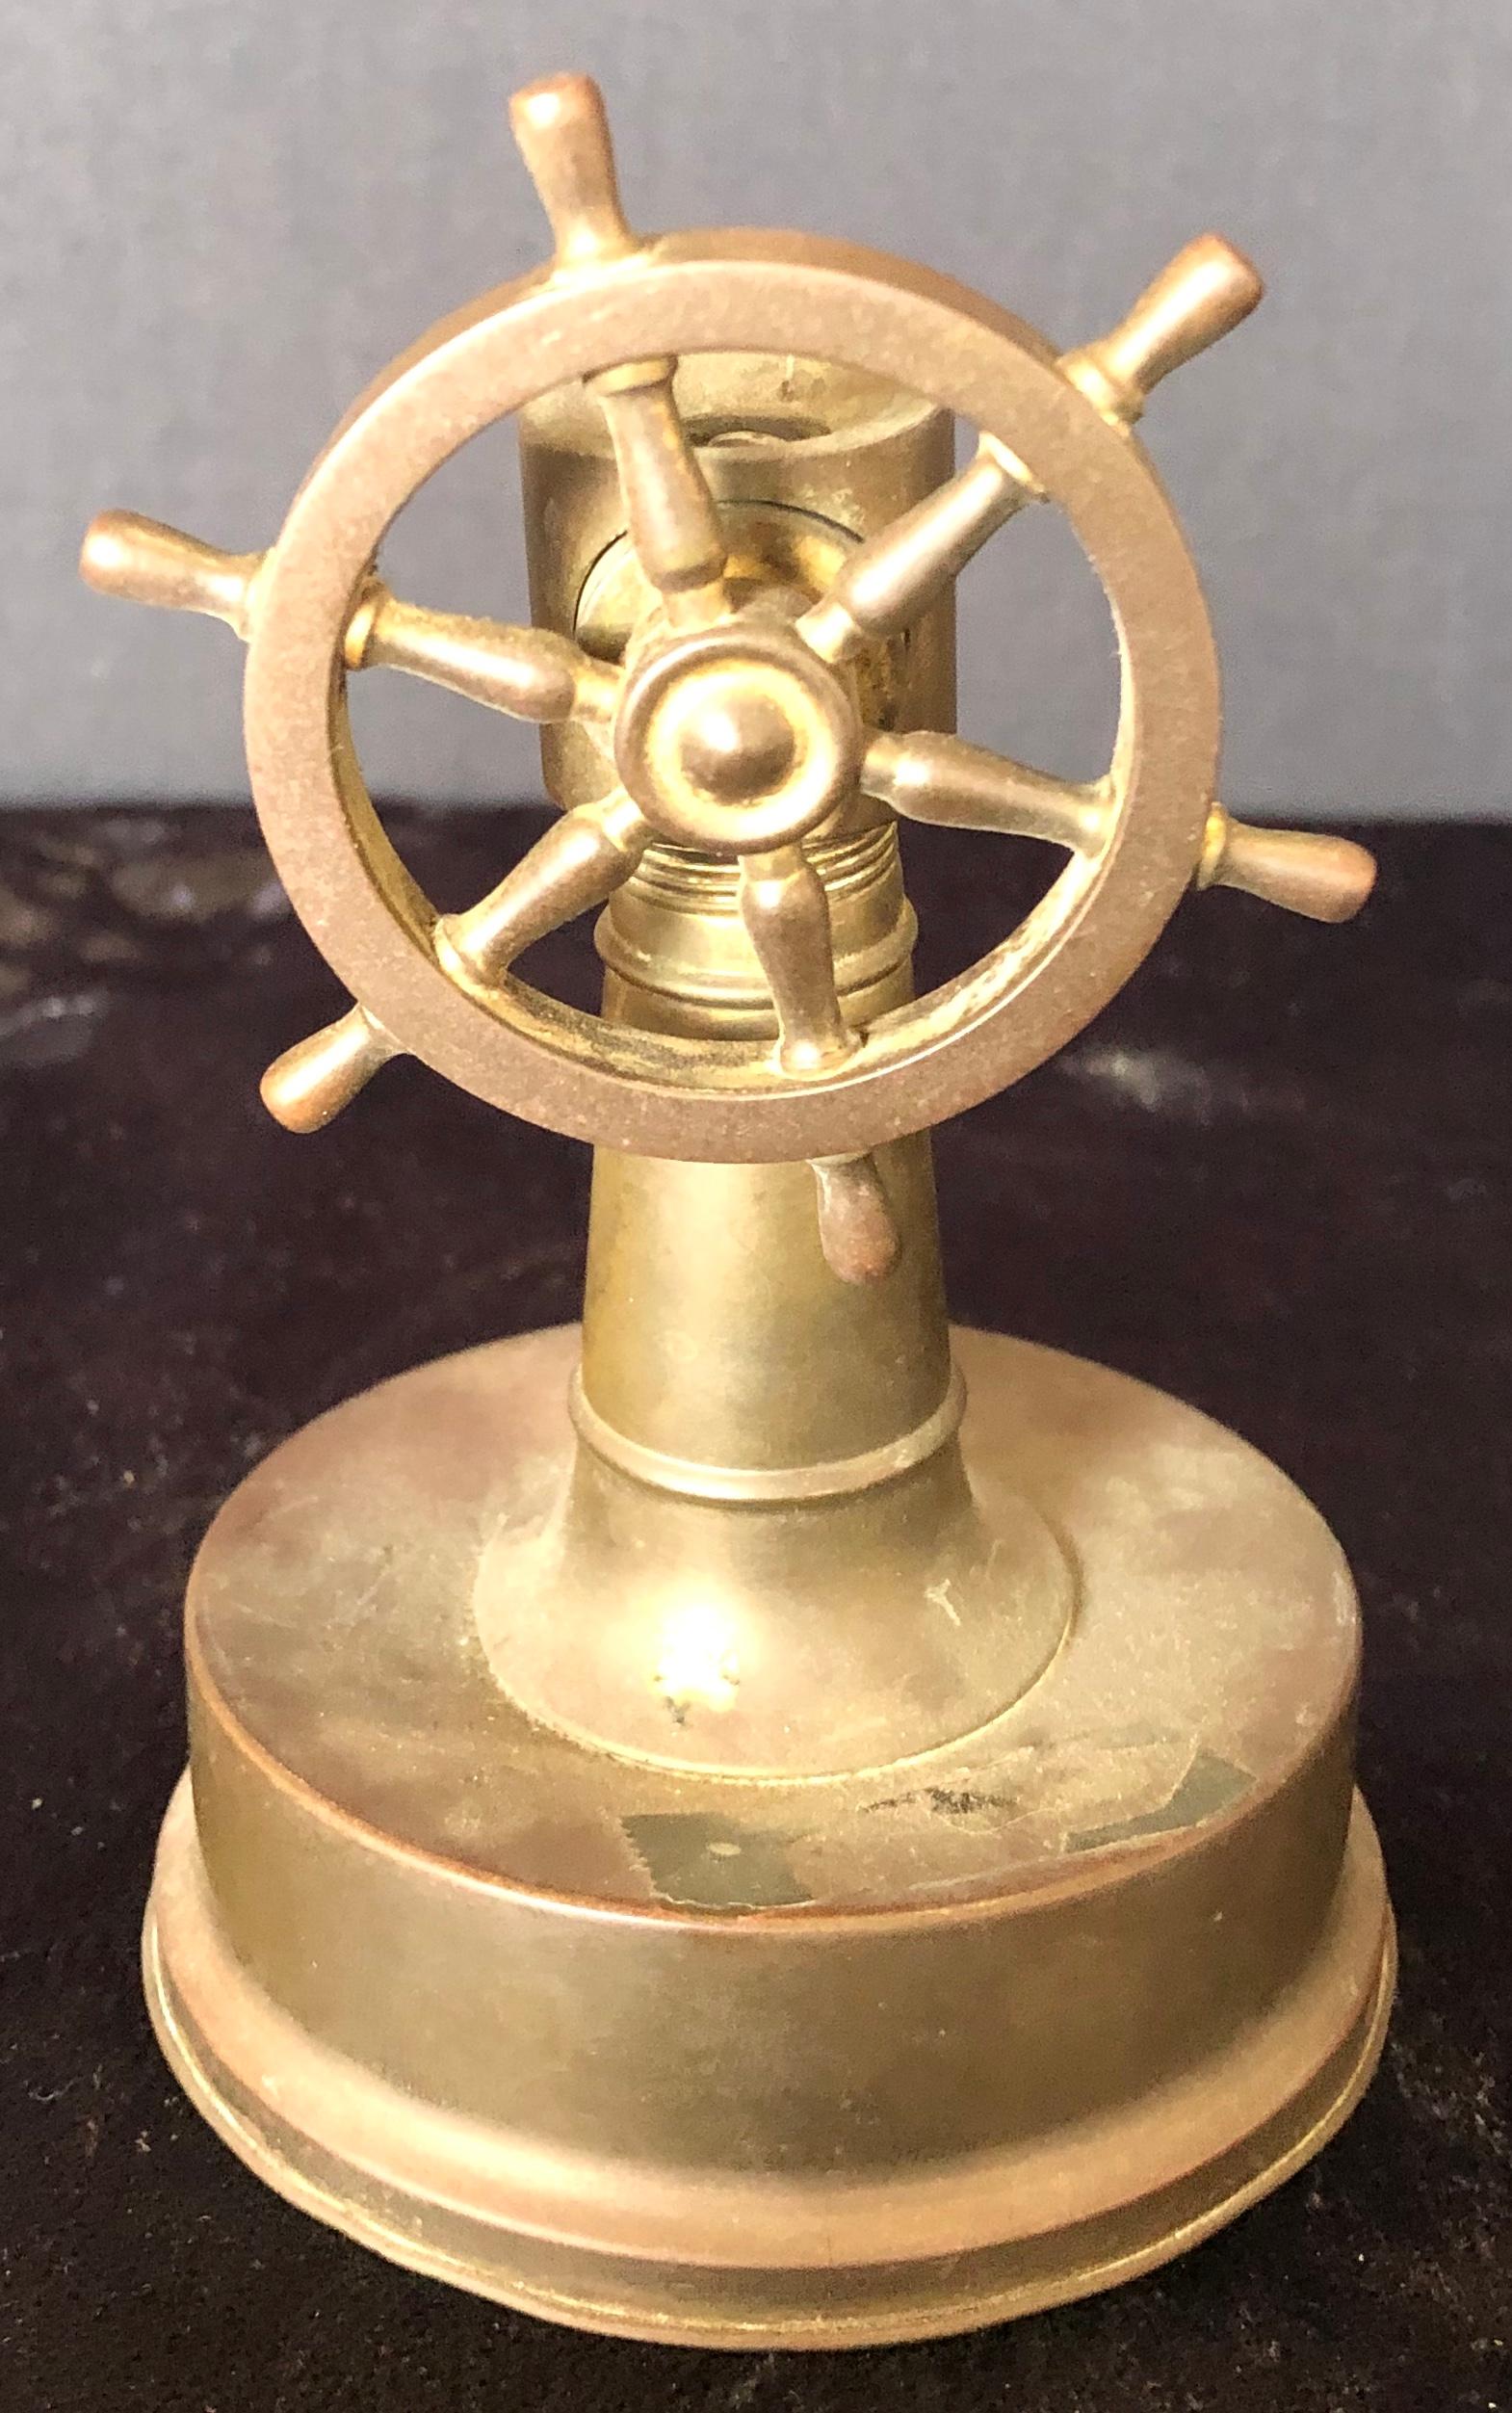 Small antique brass ships wheel tabletop cigar cutter circa 1920. Hinged base cover opens for disposing the cigar tips.
This is part of the personal collection purchased directly, From the estate of Jerry Terranova, Author of 